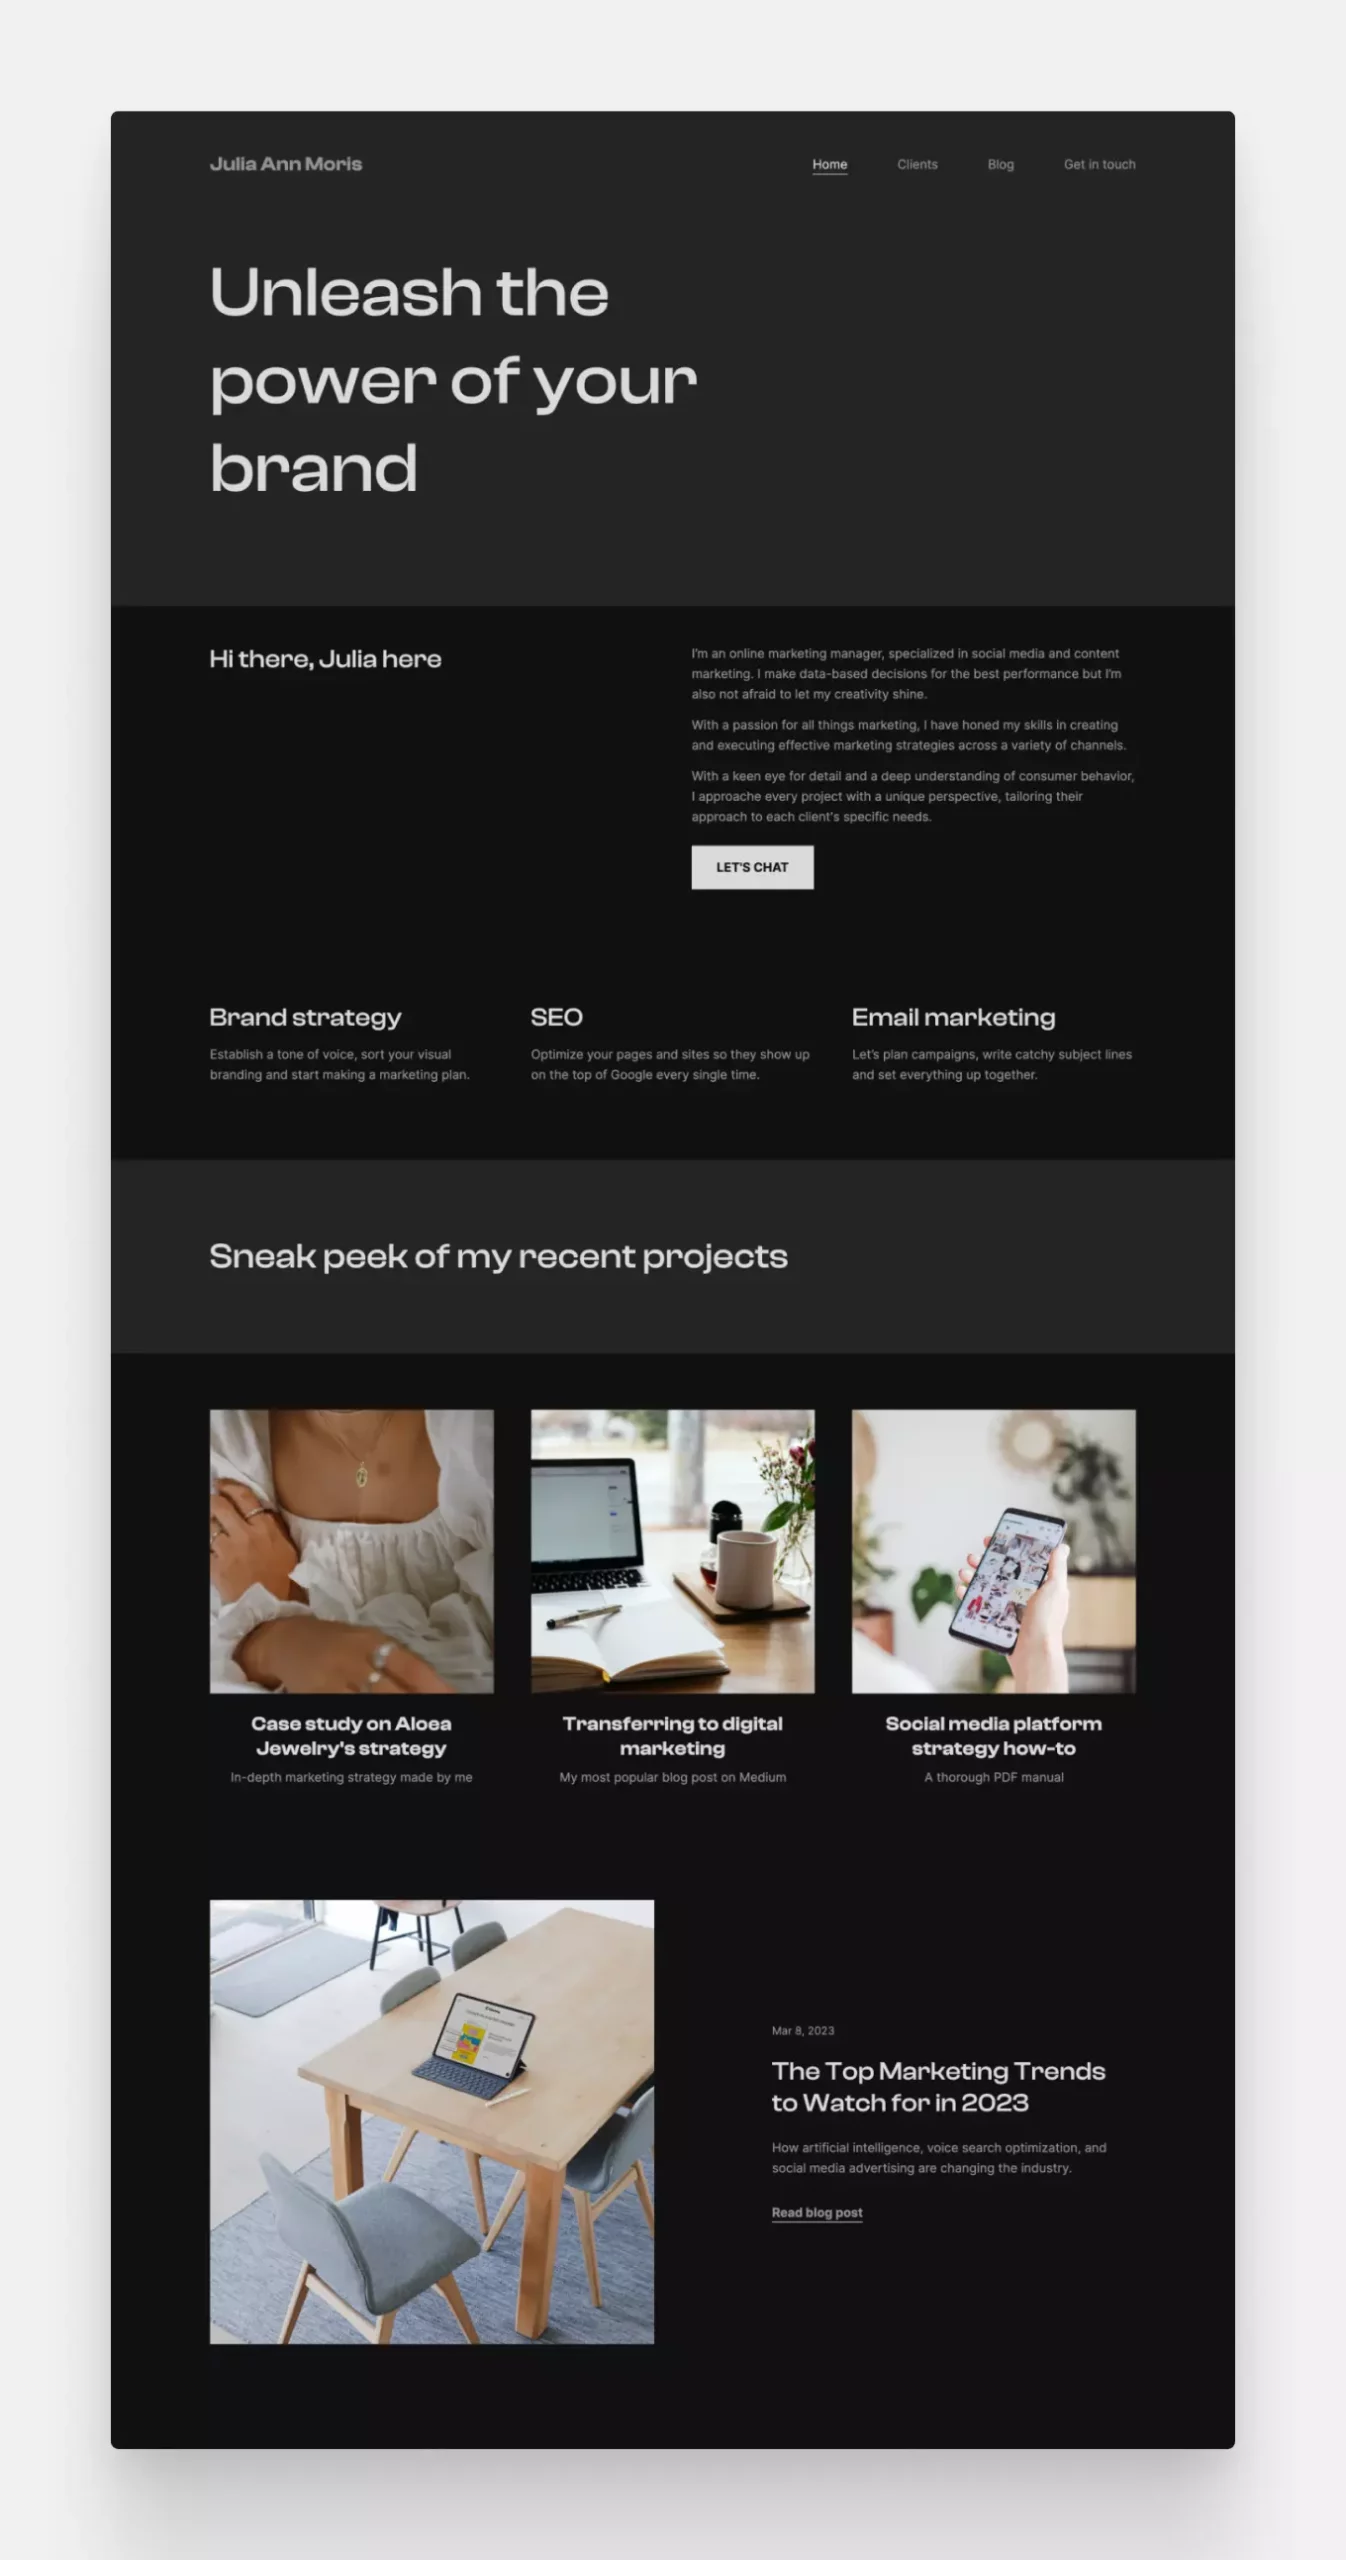 Copyfolio's "Billboard" portfolio template, featuring no image at the top, a black background by default, and a prominent, bold tagline.